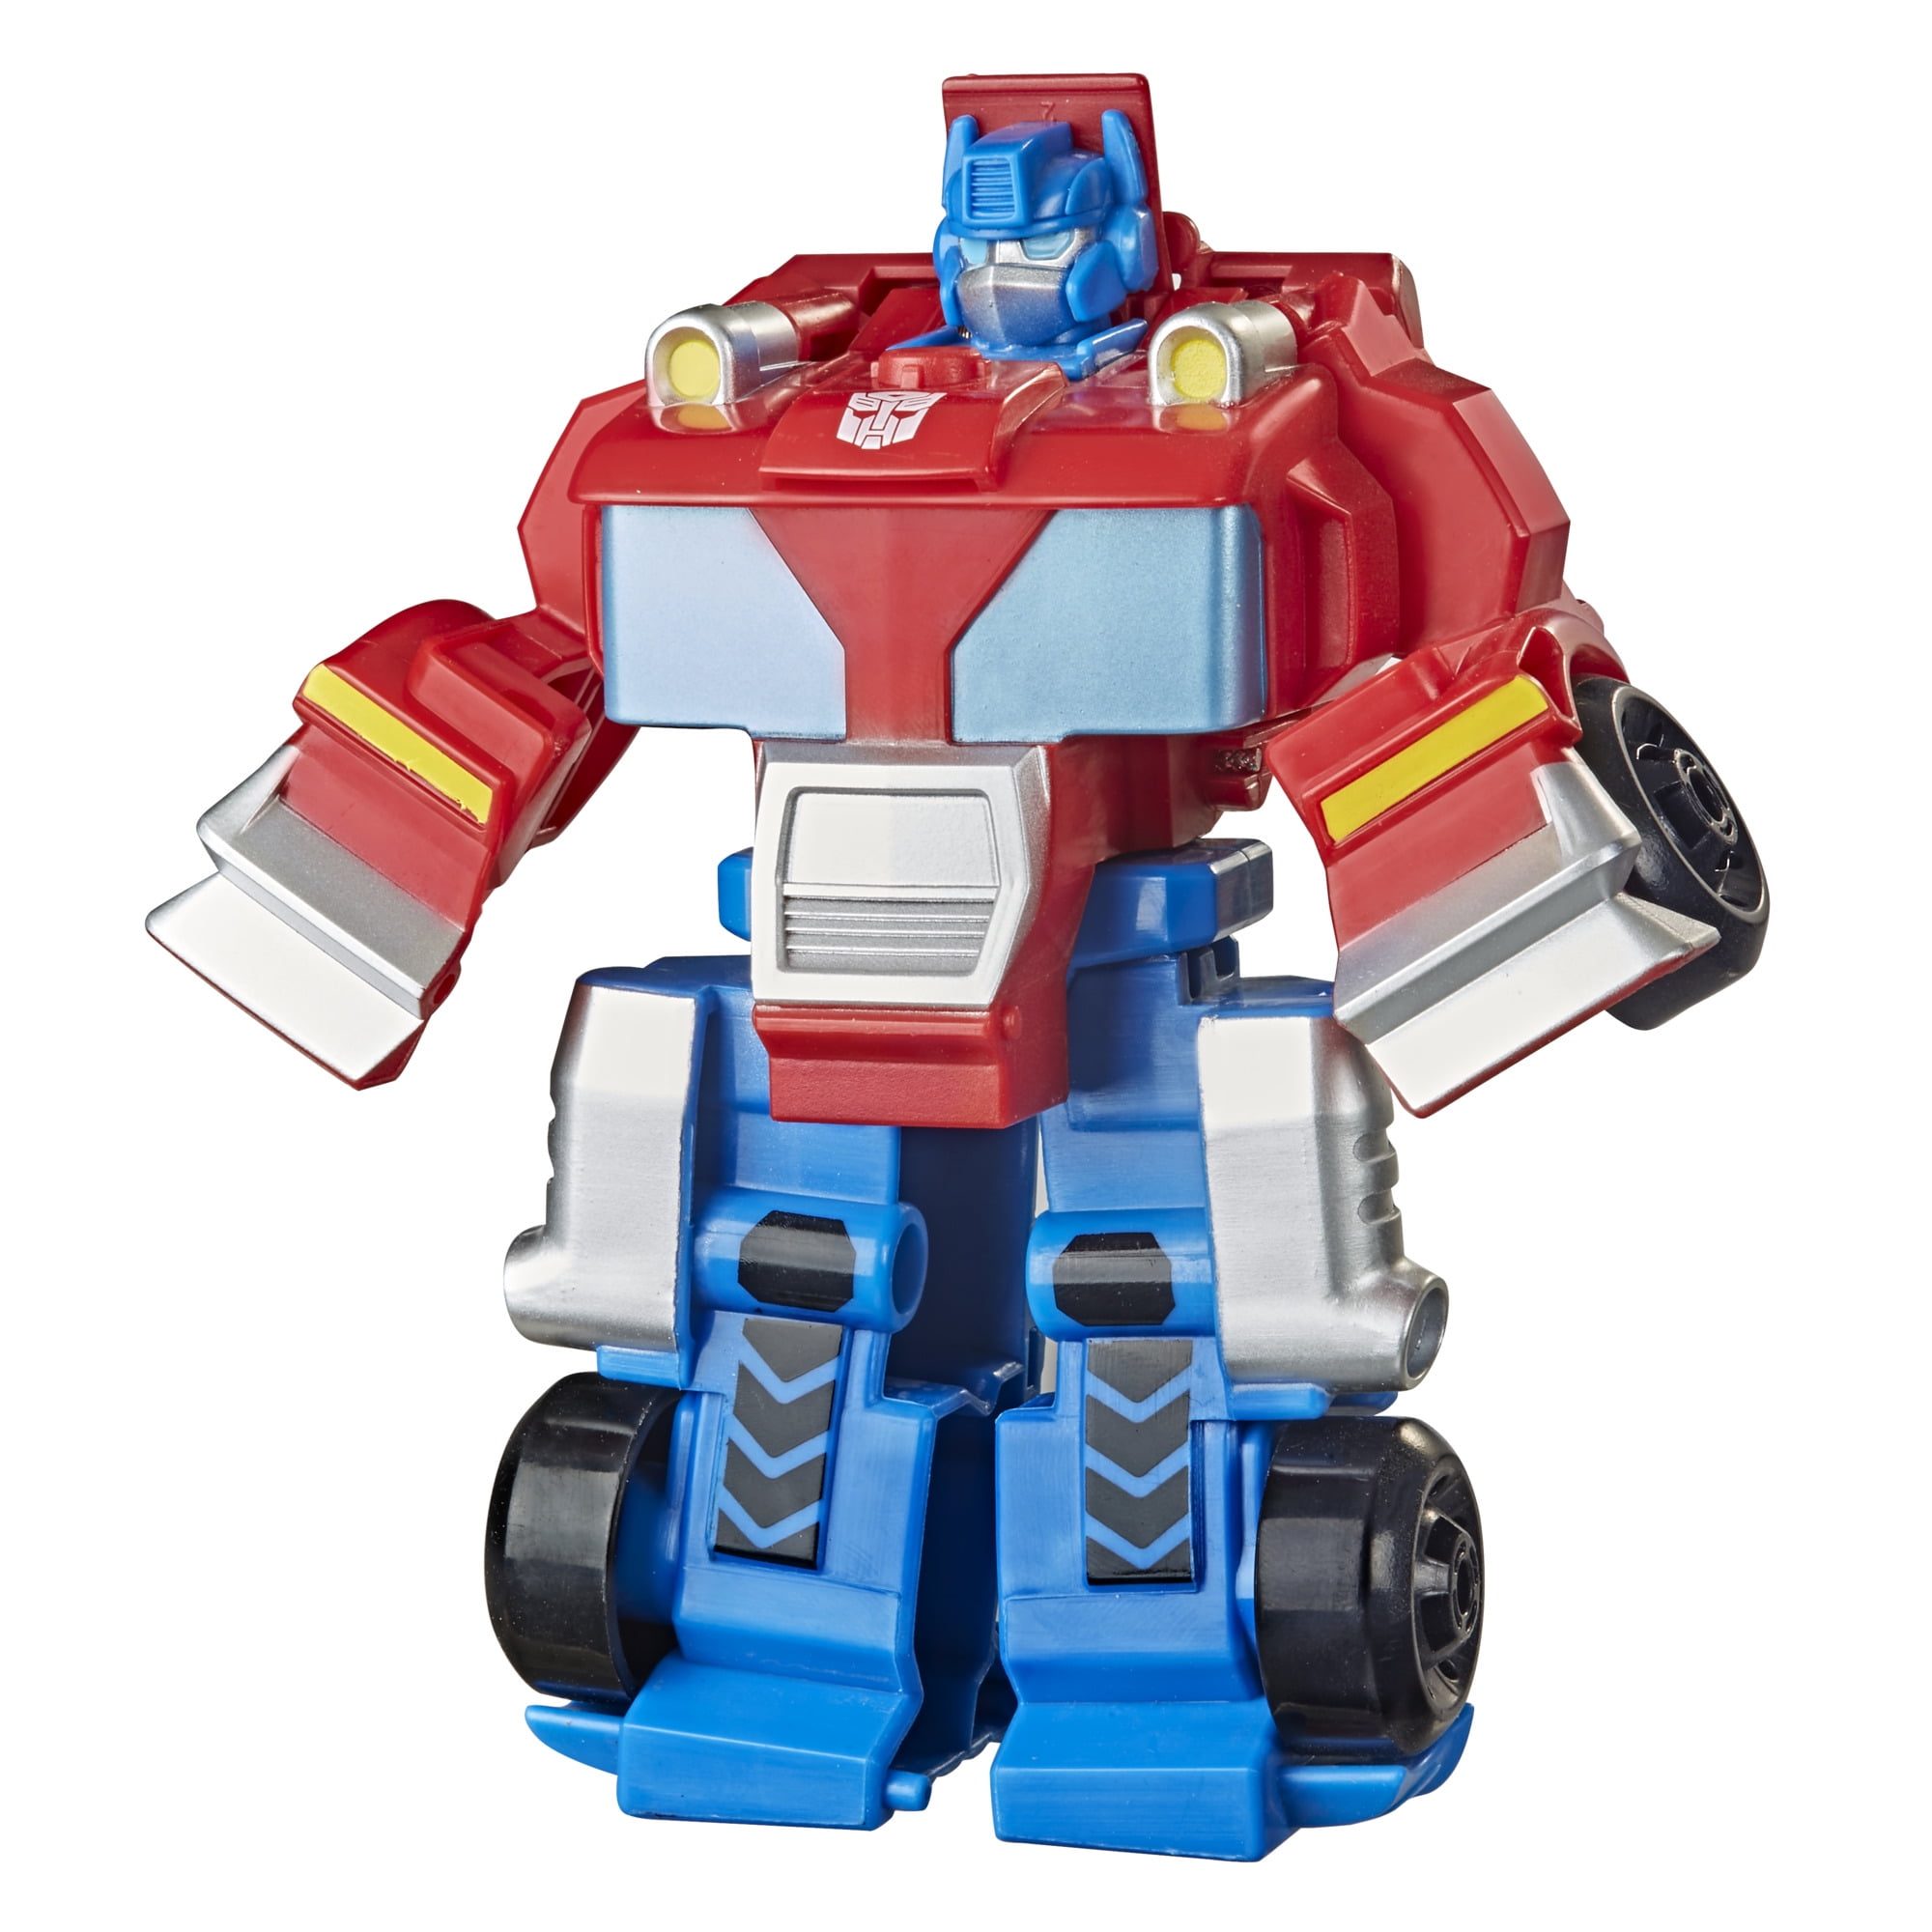 G1 Deformable Autobot Optimus Prime Hound Tank Figure Action Kids Toy Gift 